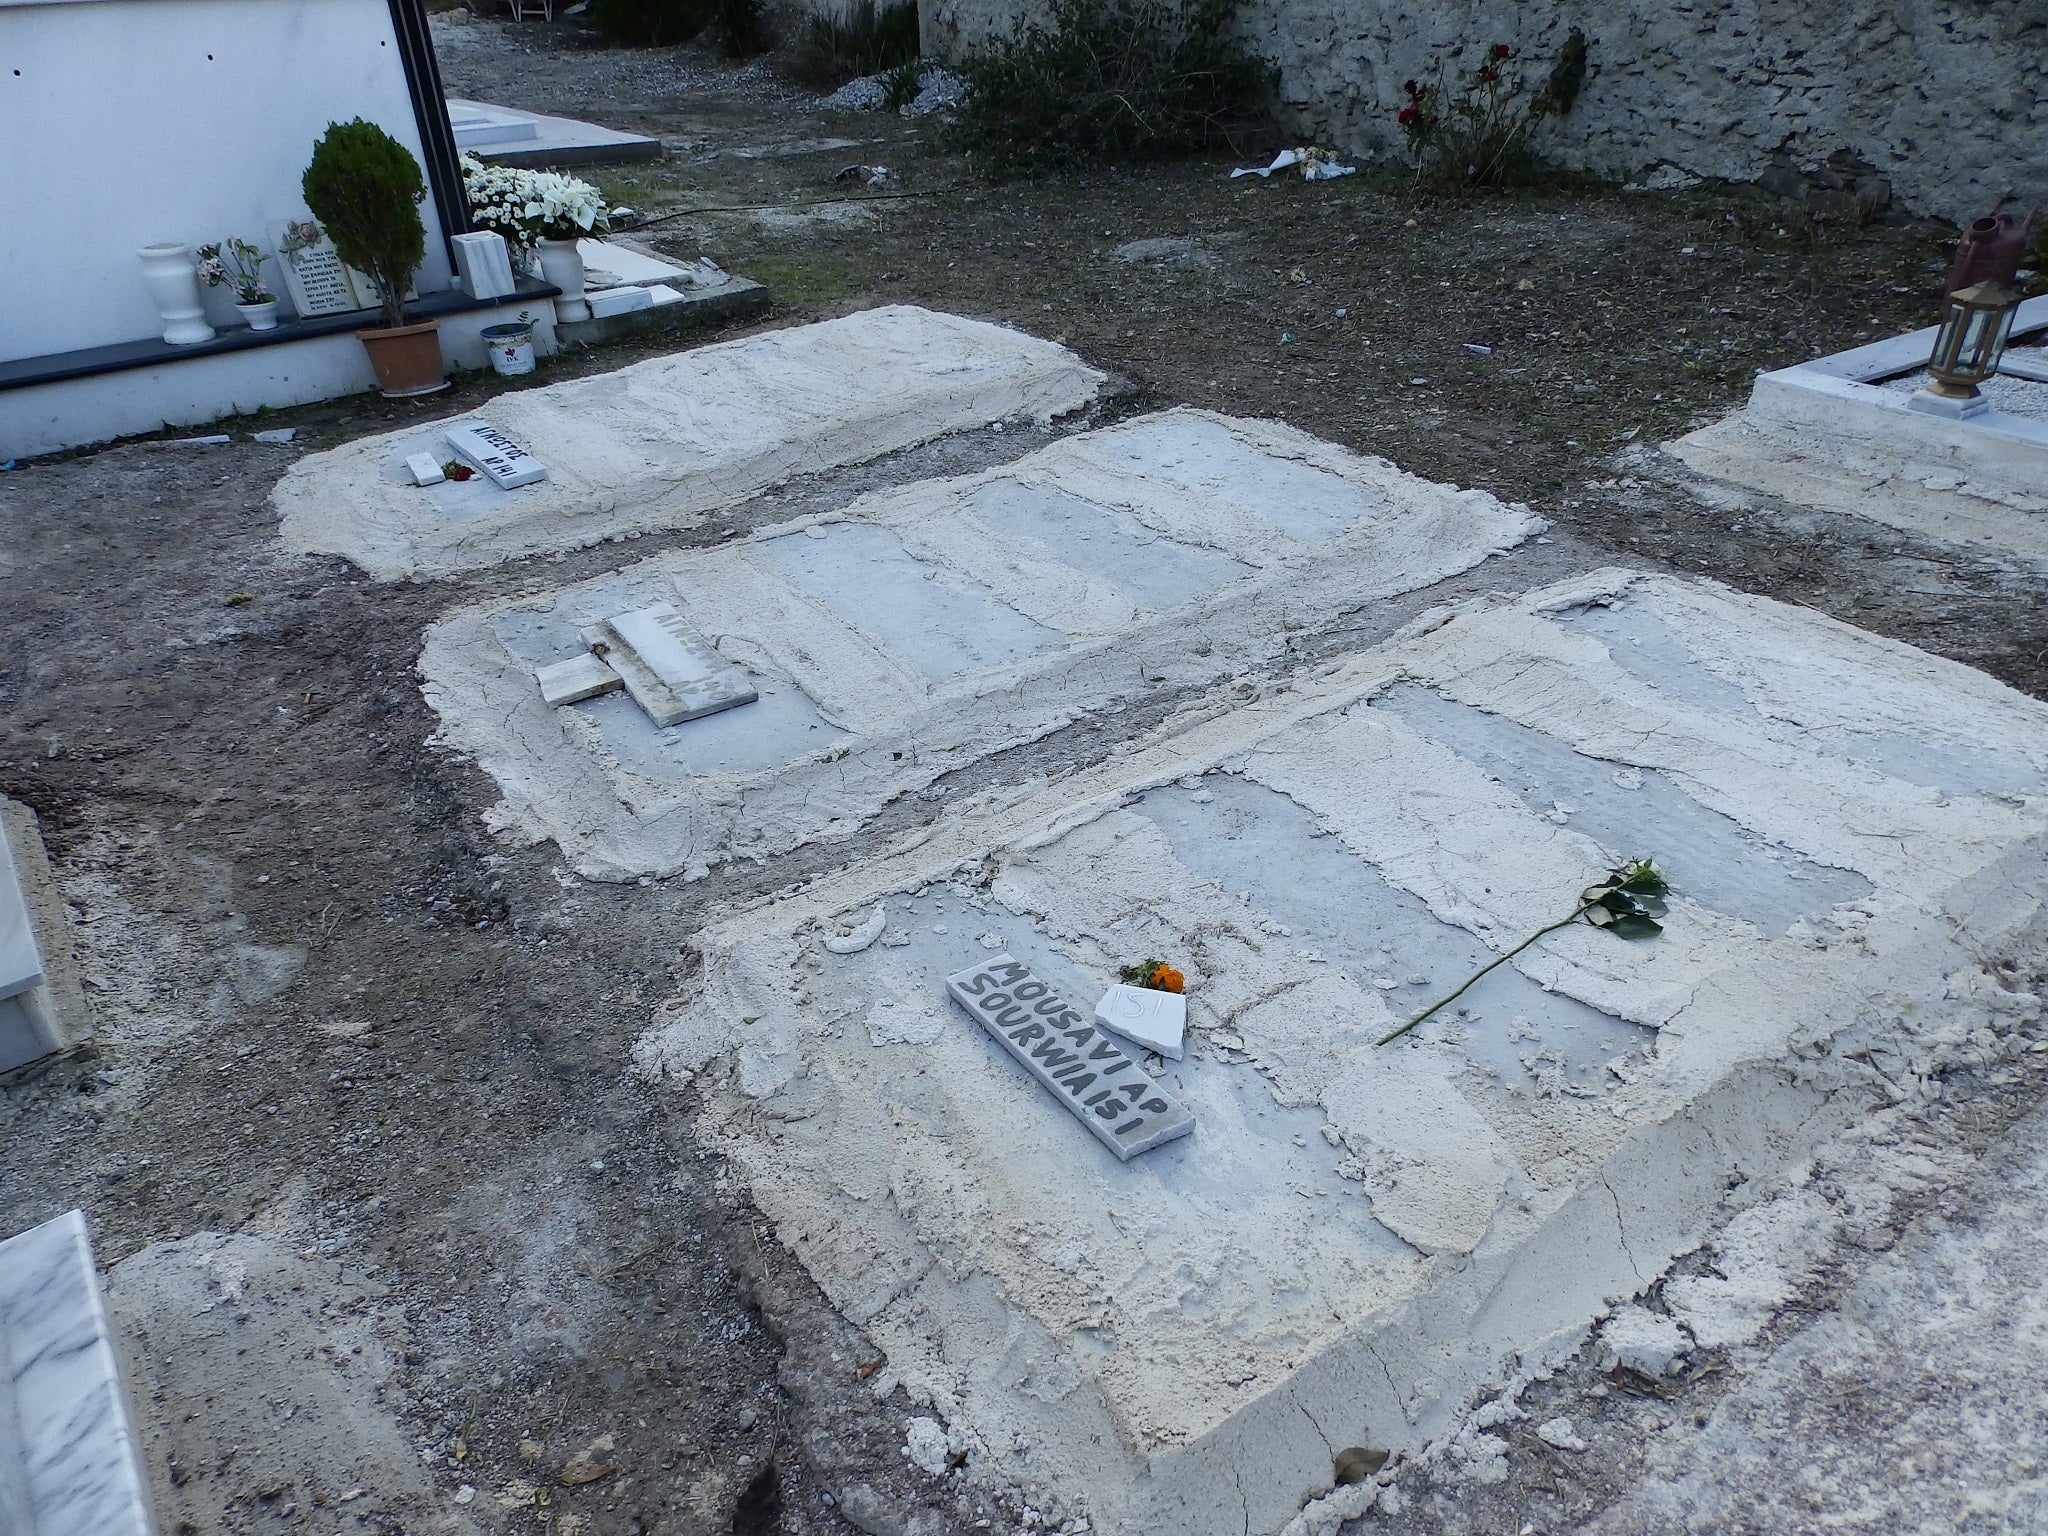 The bodies of Christian refugees are buried separately from Muslim refugees at the Agios Panteleimonas cemetery in Mytilene, Lesbos.